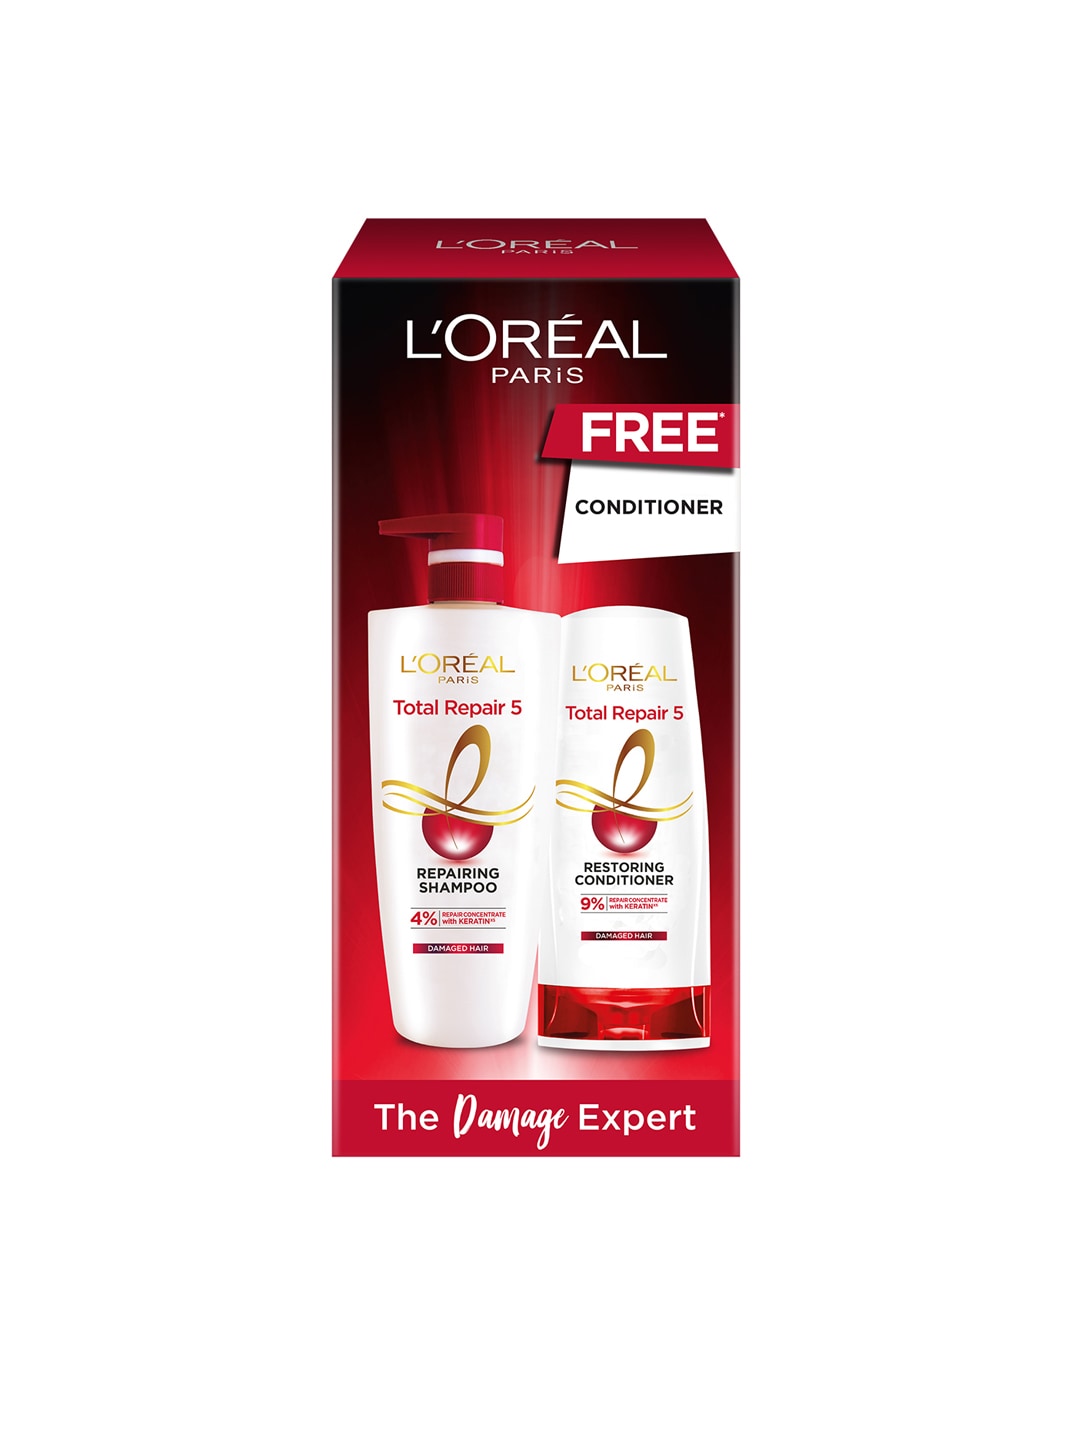 LOreal Total Repair 5 Damaged Hair Repairing Shampoo with Free Restoring Conditioner Price in India